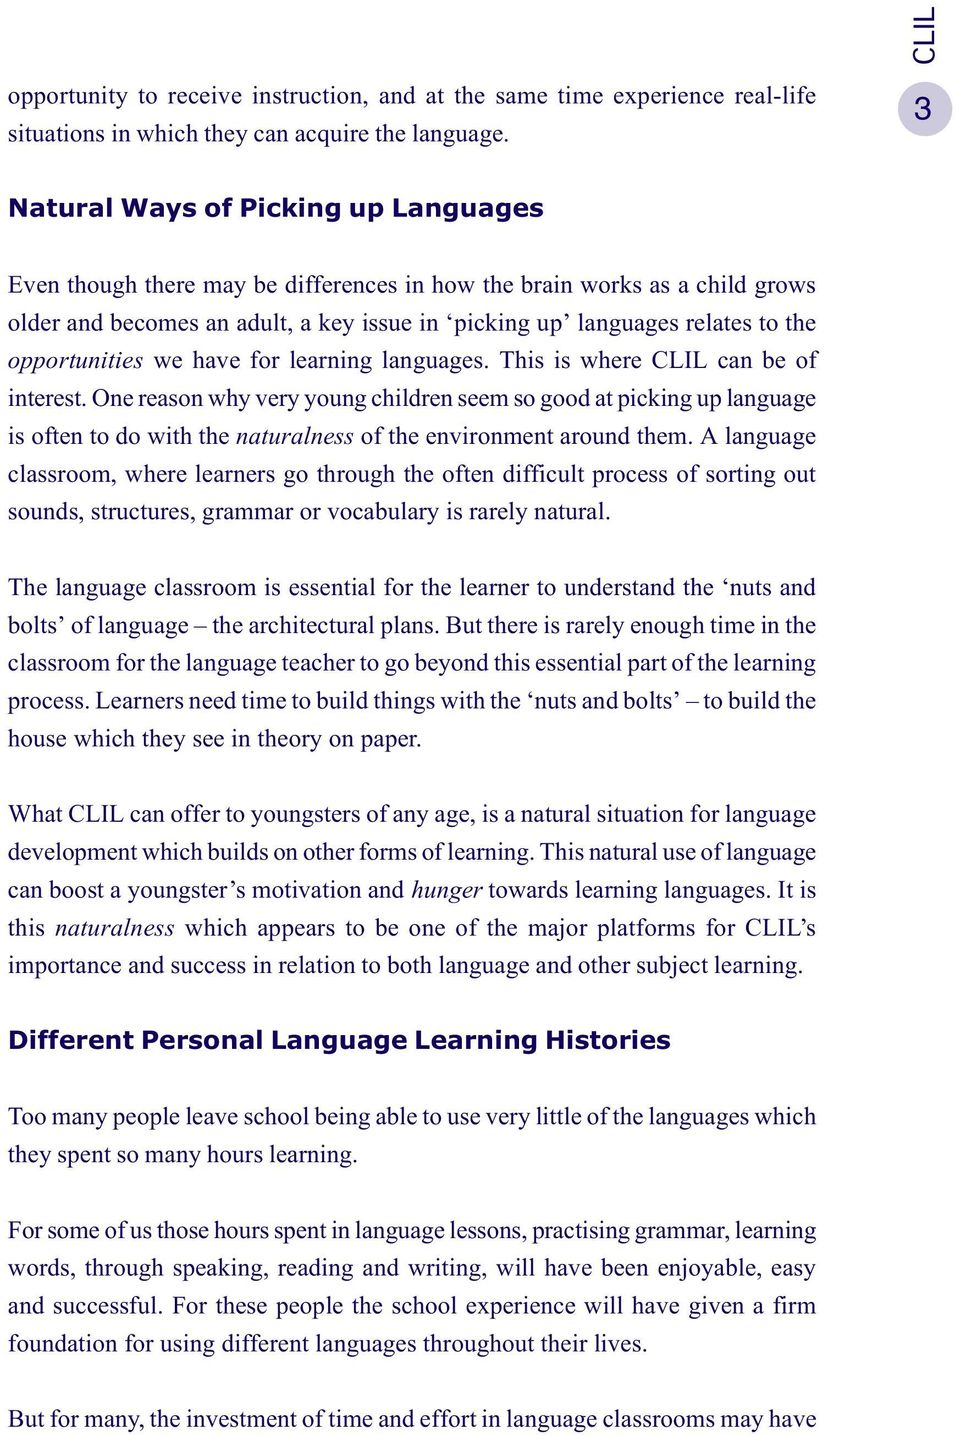 opportunities we have for learning languages. This is where CLIL can be of interest.